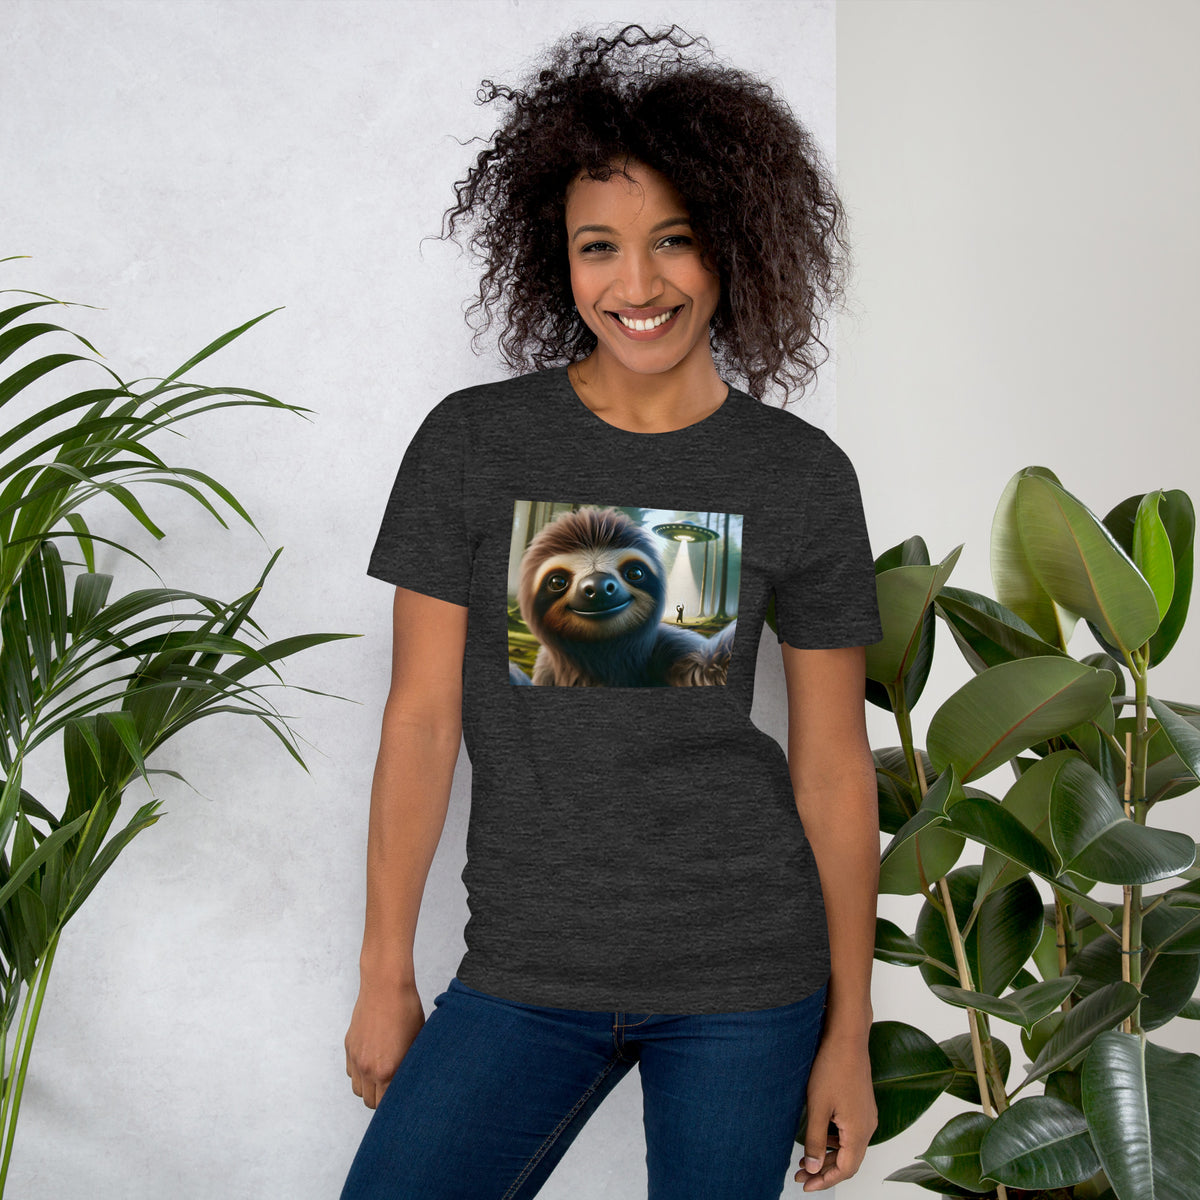 Quirky Sloth UFO Shirt, Perfect for Science Geeks & Outdoor Enthusiasts - Funny Camping Sloth Lover Shirt